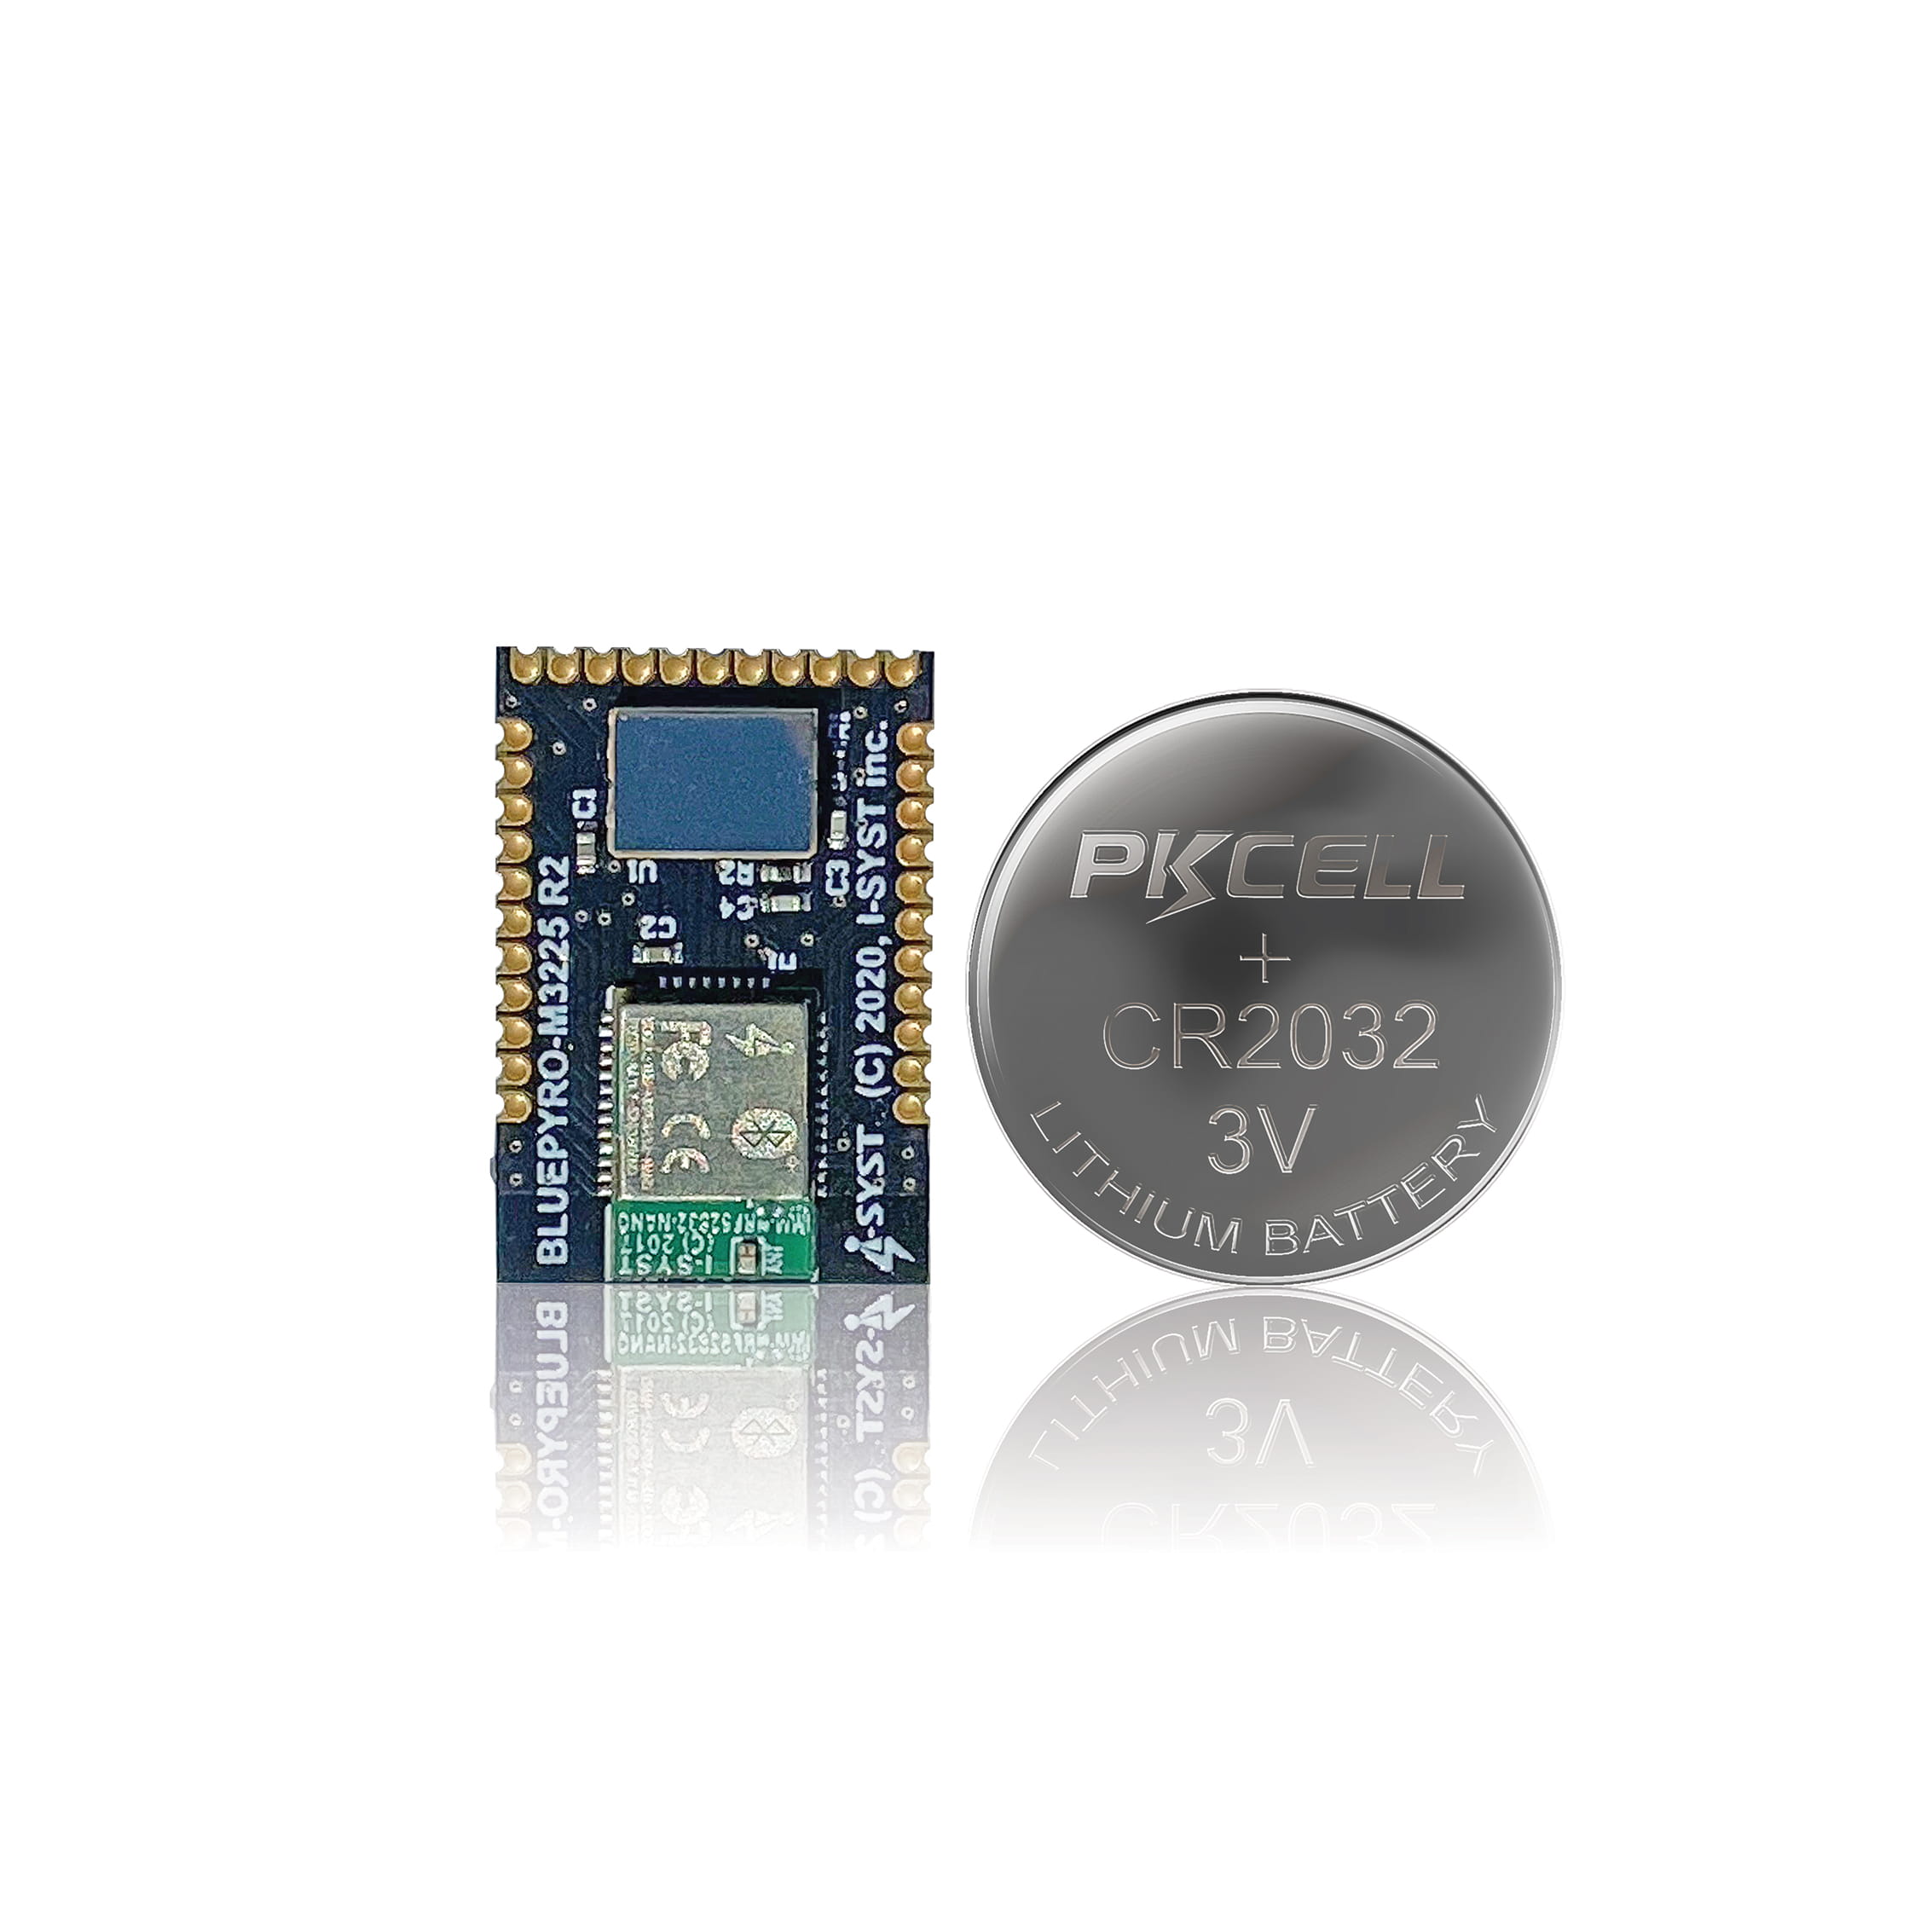 GitHub - Bluetooth-Devices/thermopro-ble: Thermopro BLE Sensors